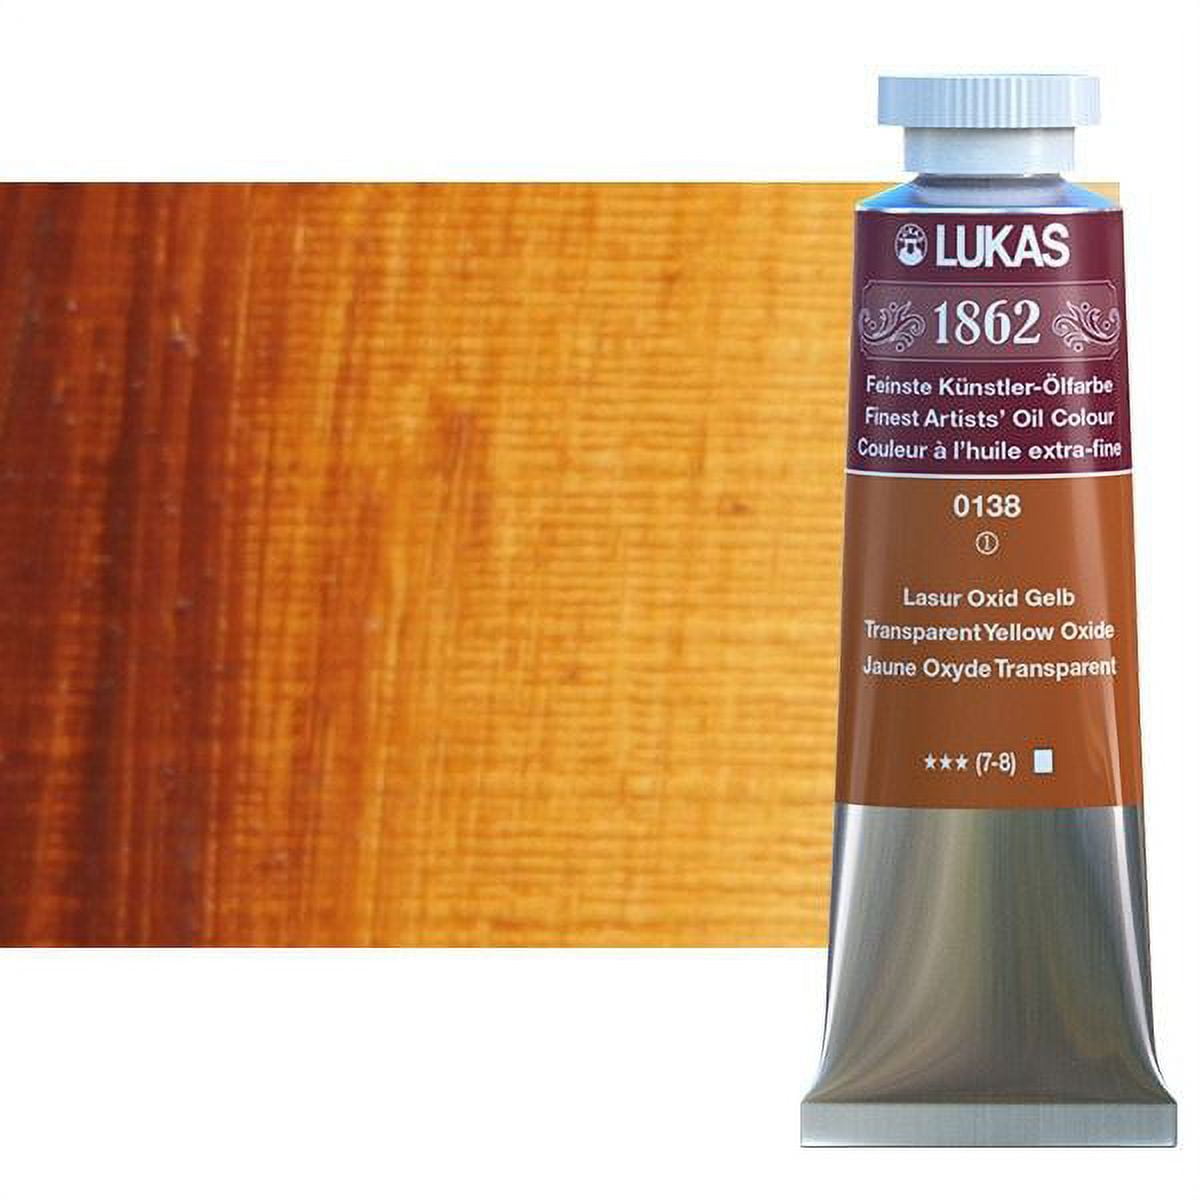 Lukas 1862 Professional Artist Oil Paint - Fast-Drying, Non-Yellowing,  Highly Pigmented Oil Paint, Titanium White, 37 mL - 2 Pack 